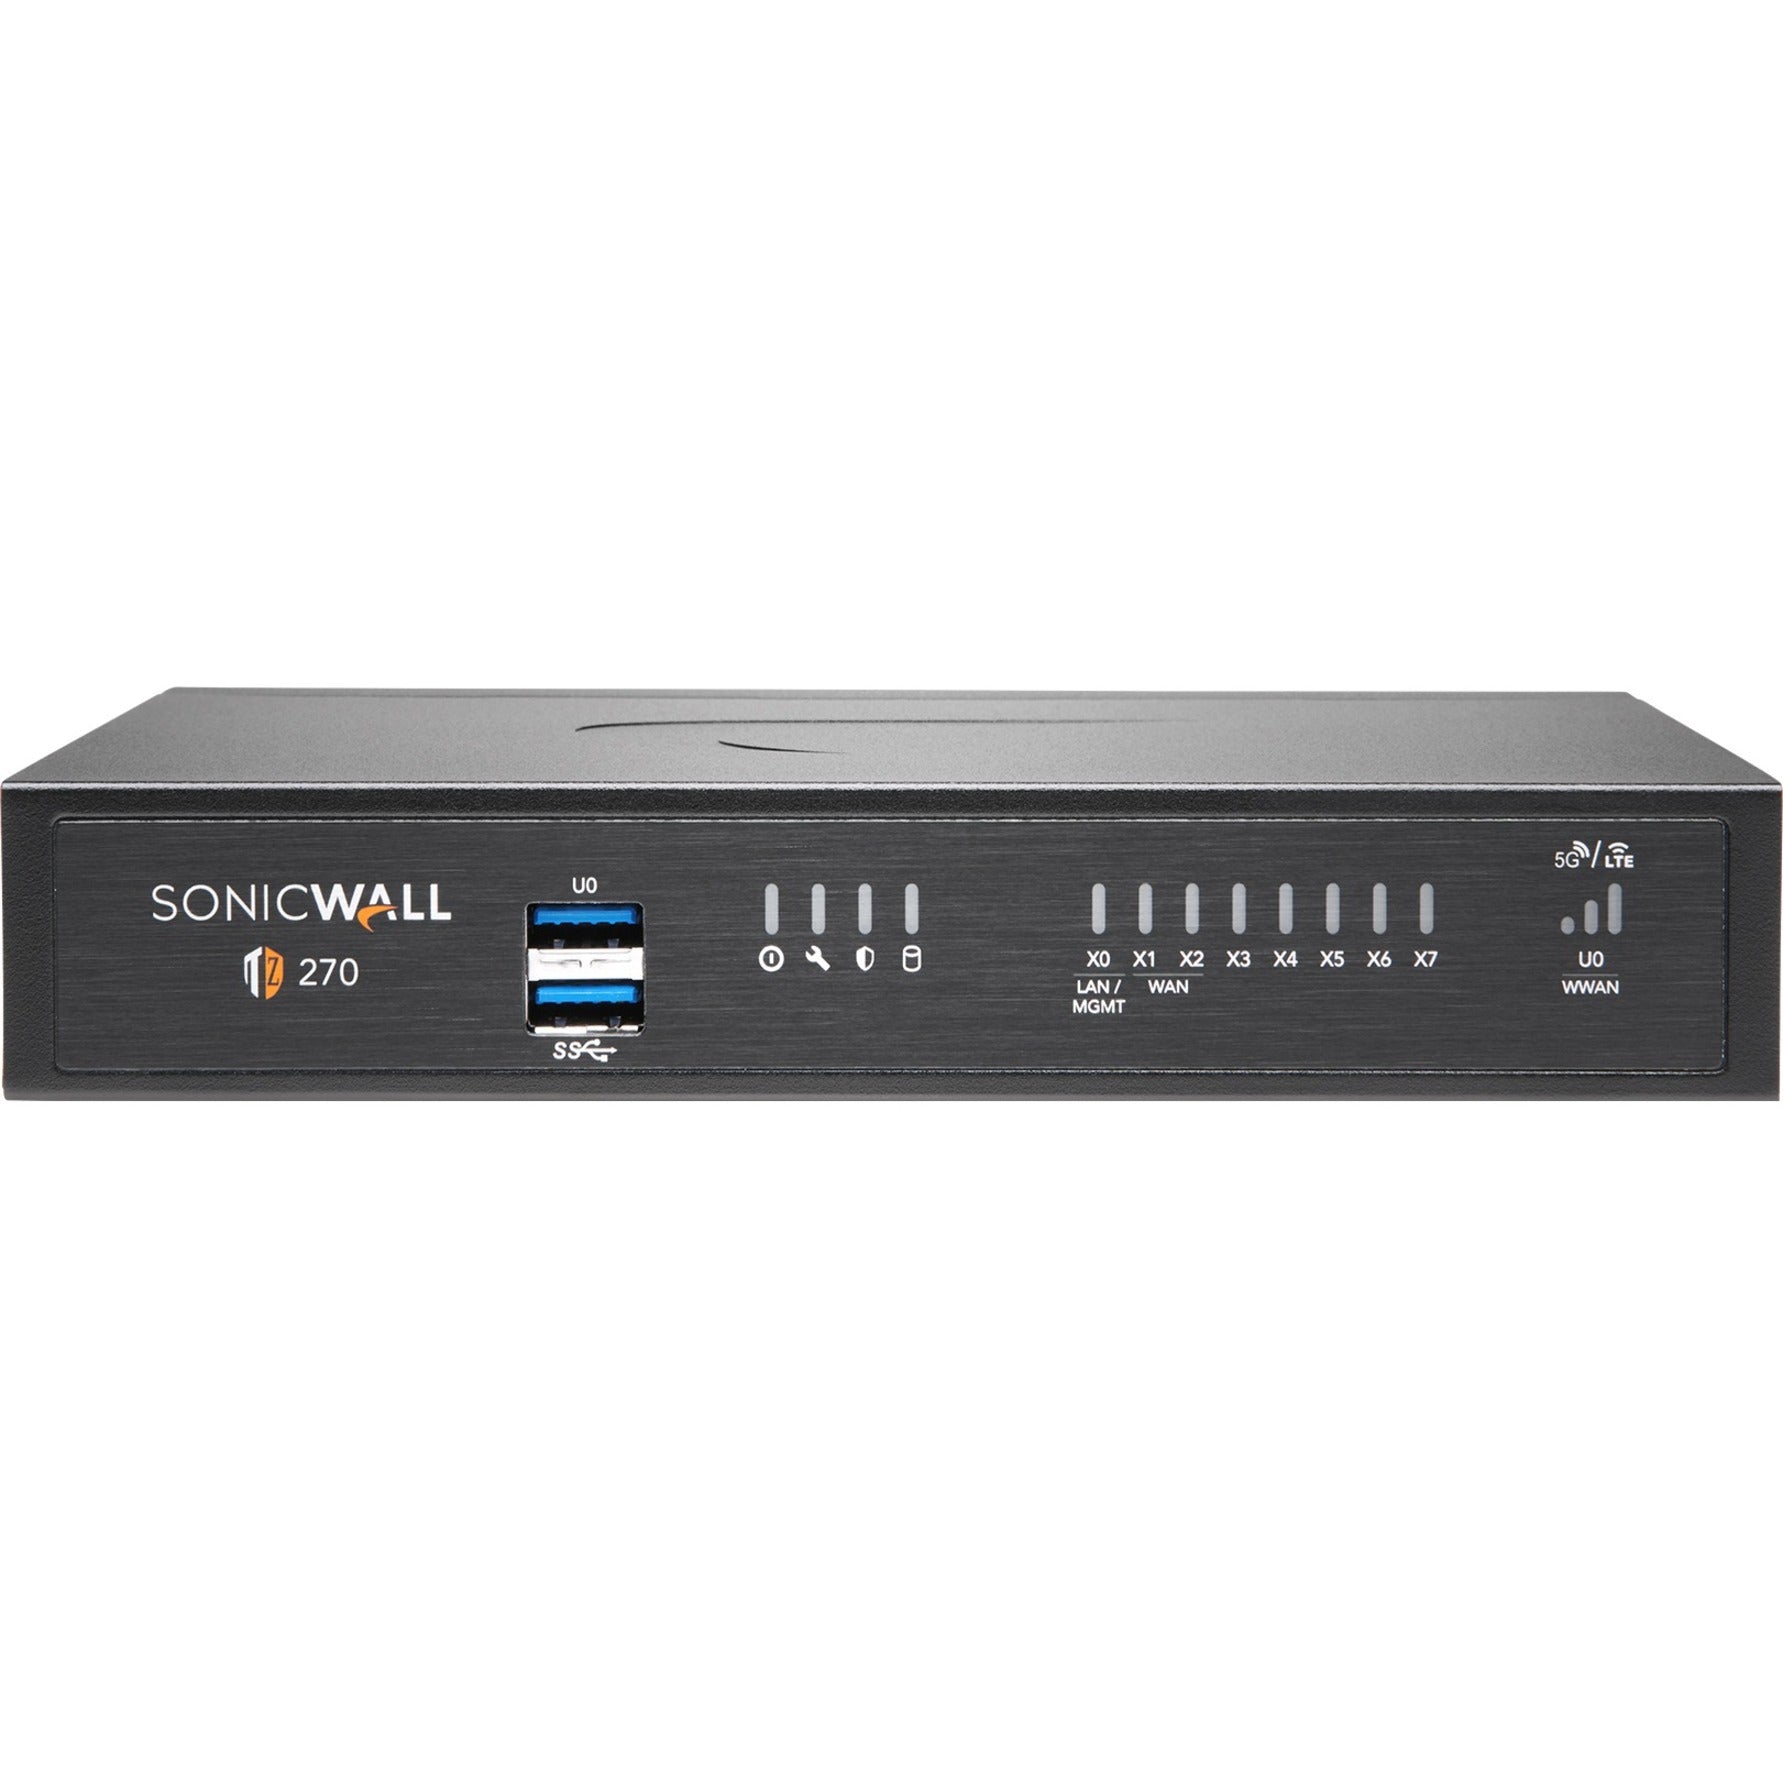 SonicWall 02-SSC-6447 TZ270 High Availability Firewall, 8 Ports, Gigabit Ethernet, Malware Protection, Content Filtering